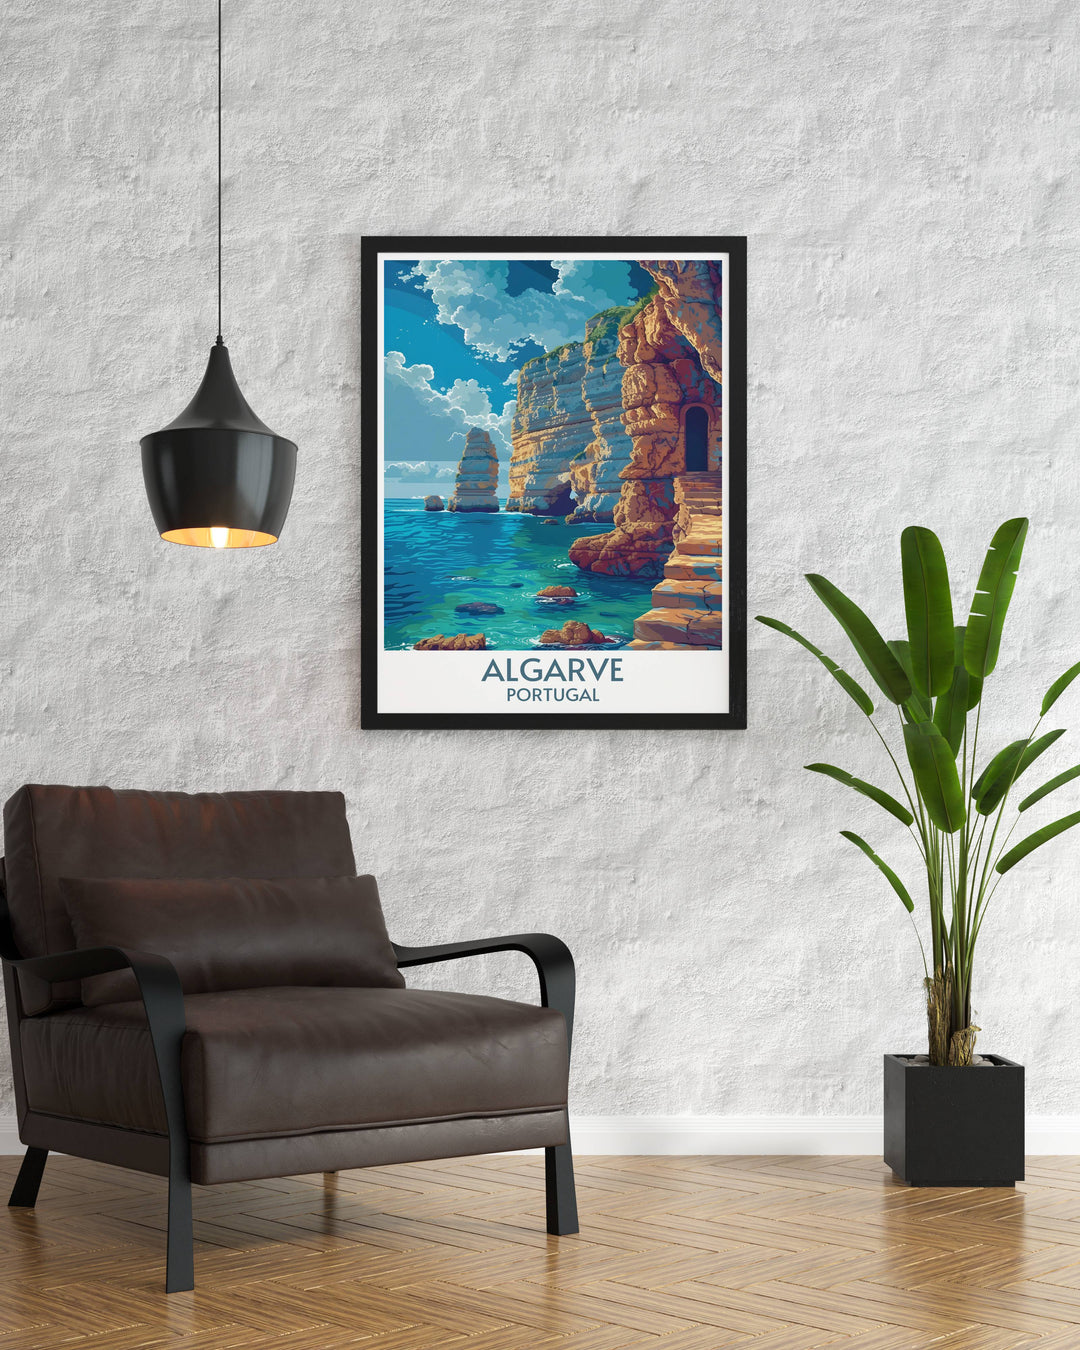 Ponta da Piedade matted art print highlighting the picturesque scenery and natural beauty of this Algarve icon. Ideal for enhancing your home decor with a touch of coastal elegance or as a special gift.